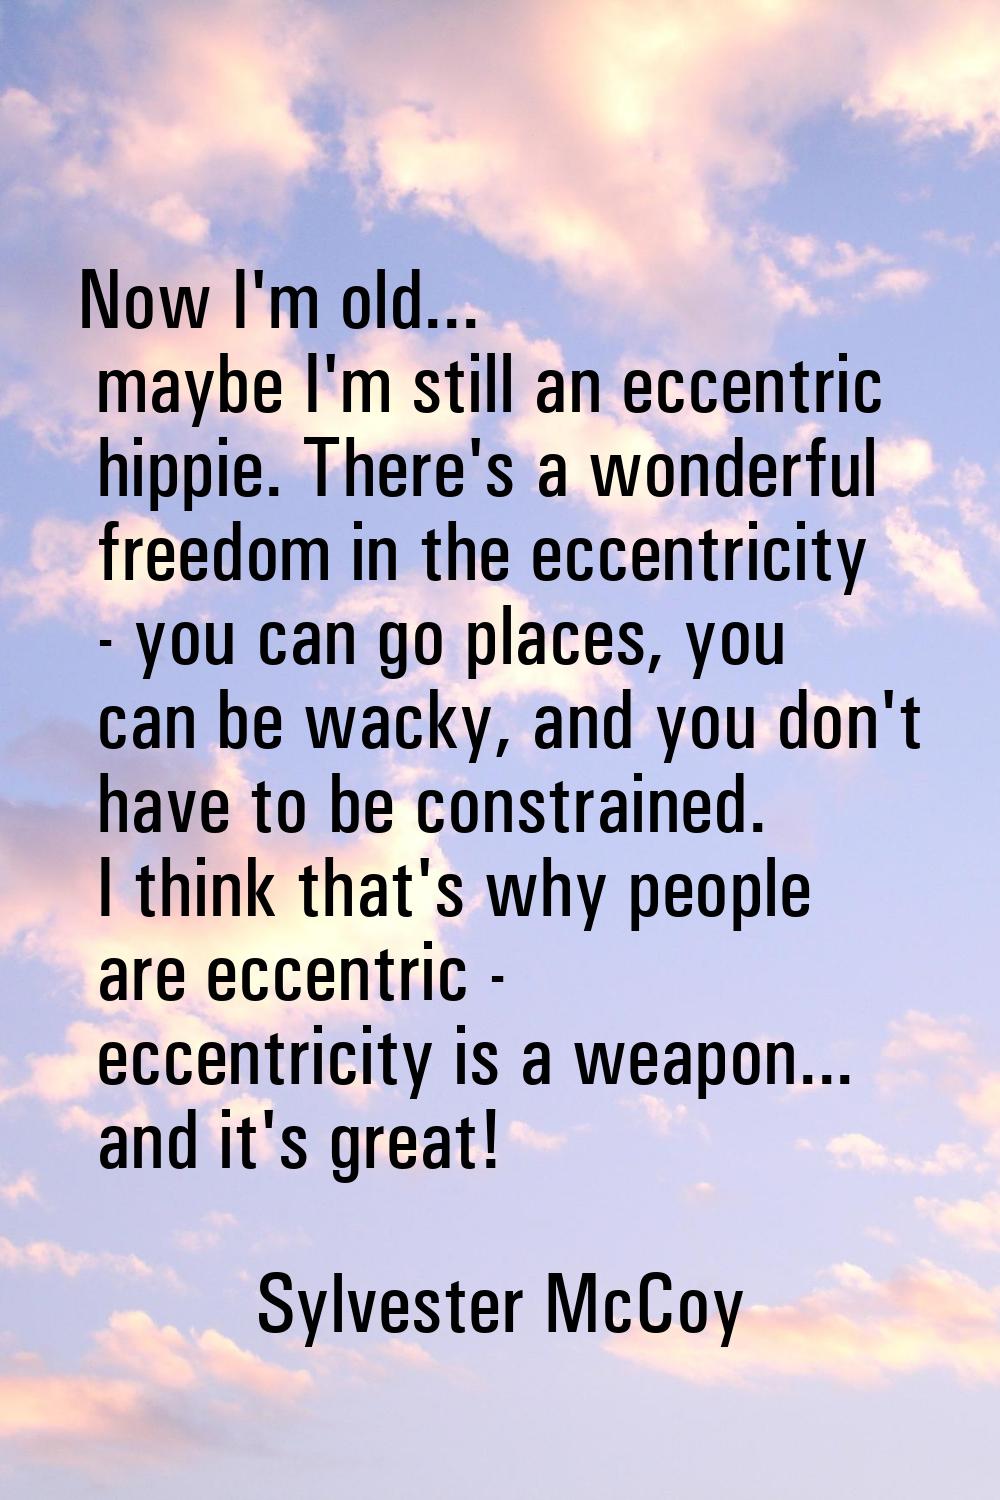 Now I'm old... maybe I'm still an eccentric hippie. There's a wonderful freedom in the eccentricity